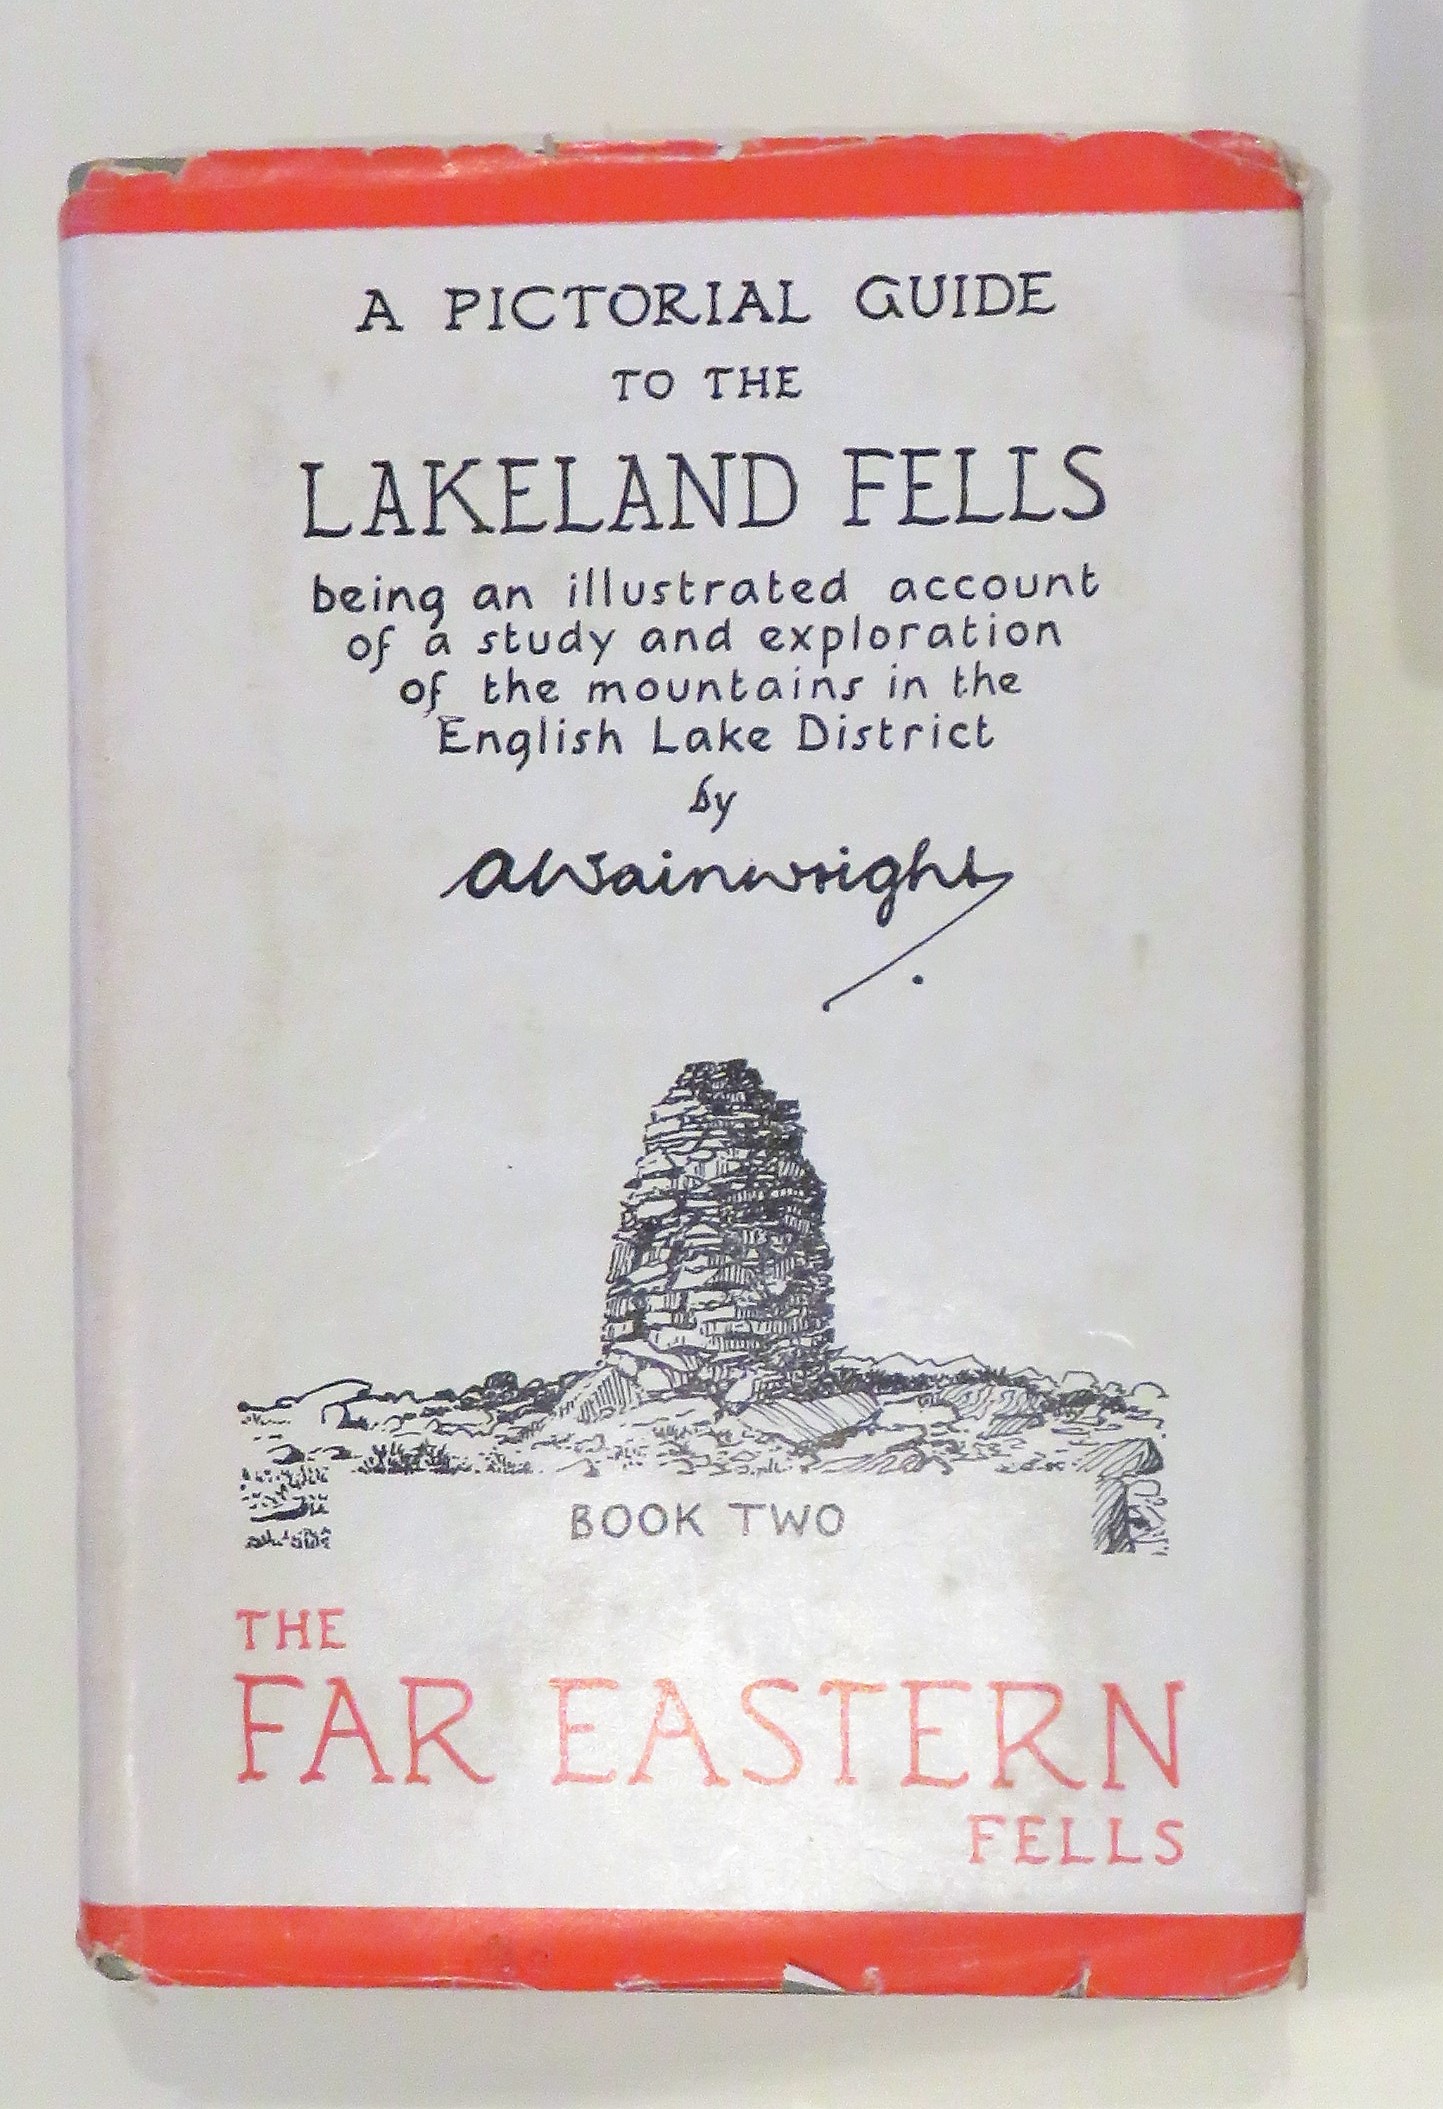 A Pictorial Guide to the Lakeland Fells Being An Illustrated Account of a Study and Exploration of the Mountains in the English Lake District